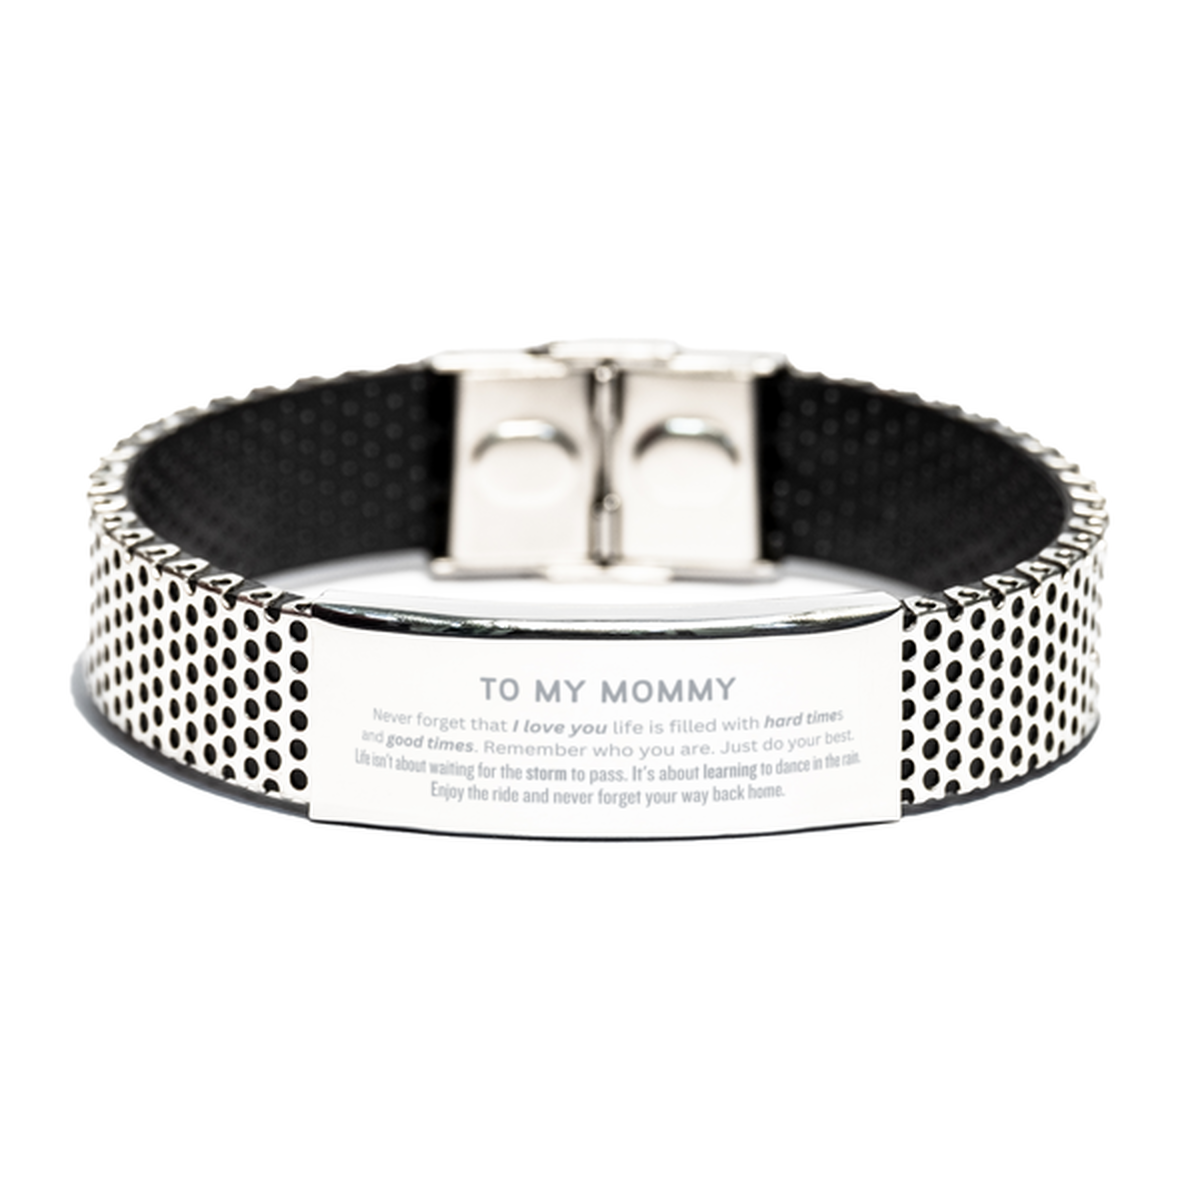 Christmas Mommy Stainless Steel Bracelet Gifts, To My Mommy Birthday Thank You Gifts For Mommy, Graduation Unique Gifts For Mommy To My Mommy Never forget that I love you life is filled with hard times and good times. Remember who you are. Just do your be